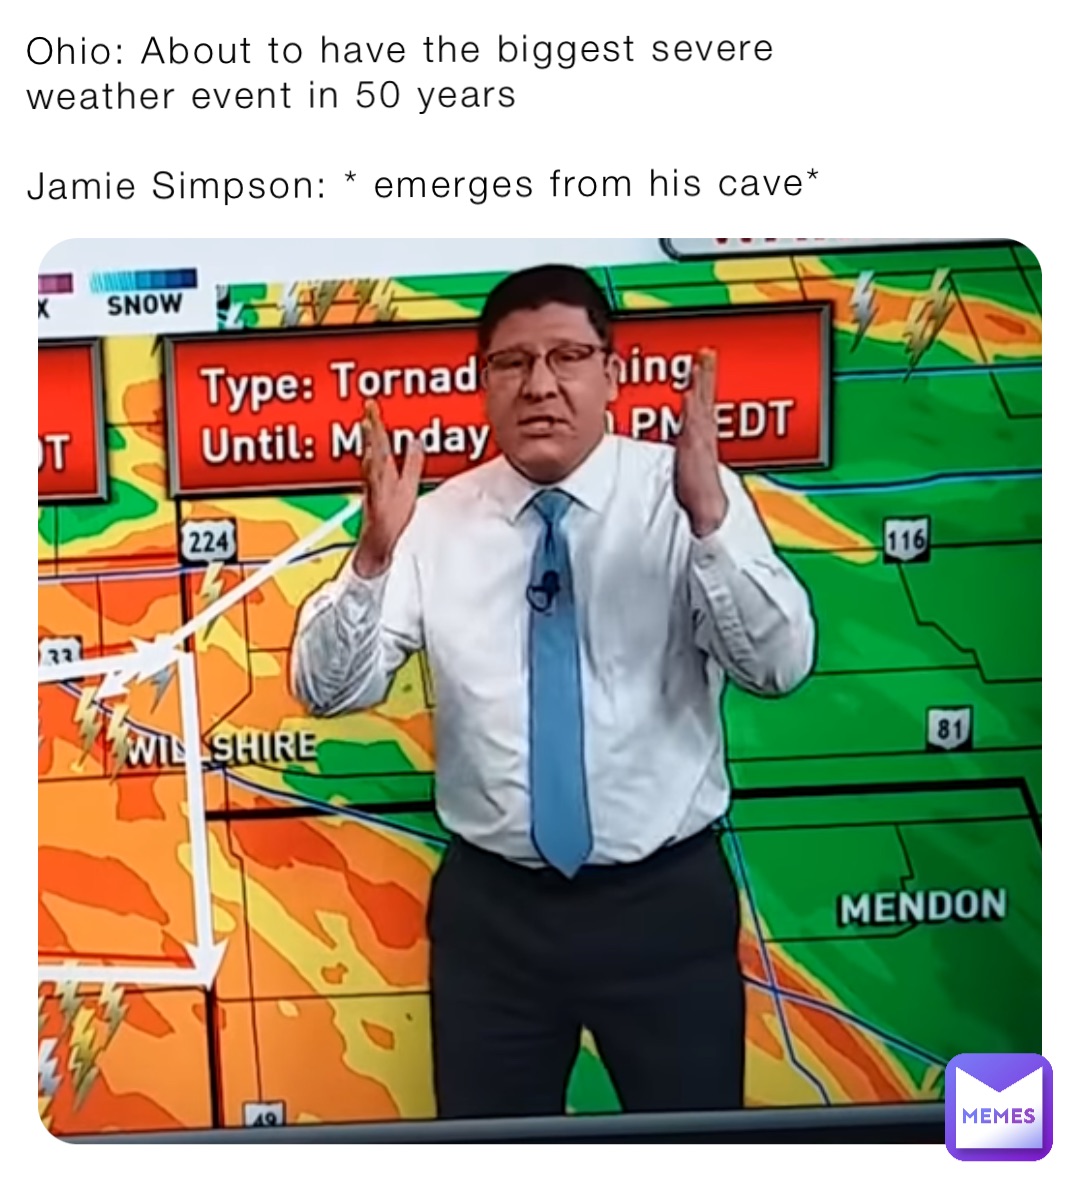 Ohio: About to have the biggest severe weather event in 50 years

Jamie Simpson: * emerges from his cave*